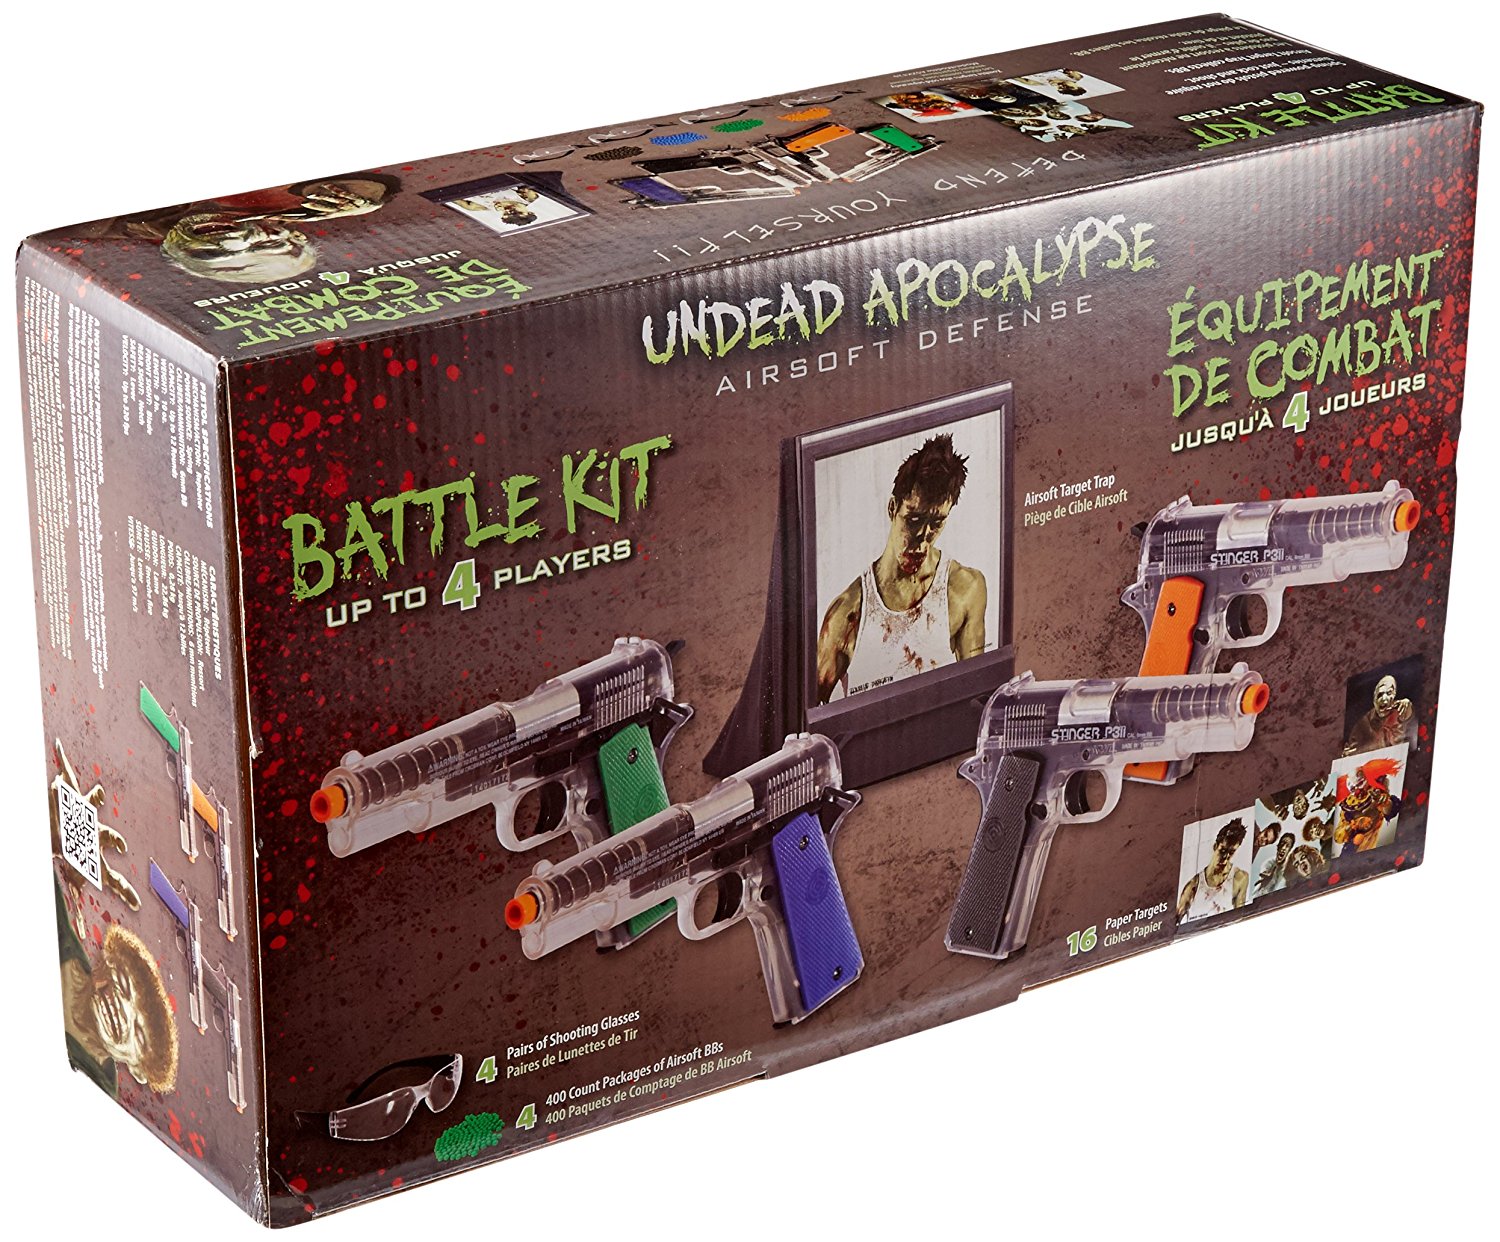 Undead Apocalypse Zombie Airsoft Gun Fun Kit – Includes 4 Pistols and 4 Goggles! Just $25.92!